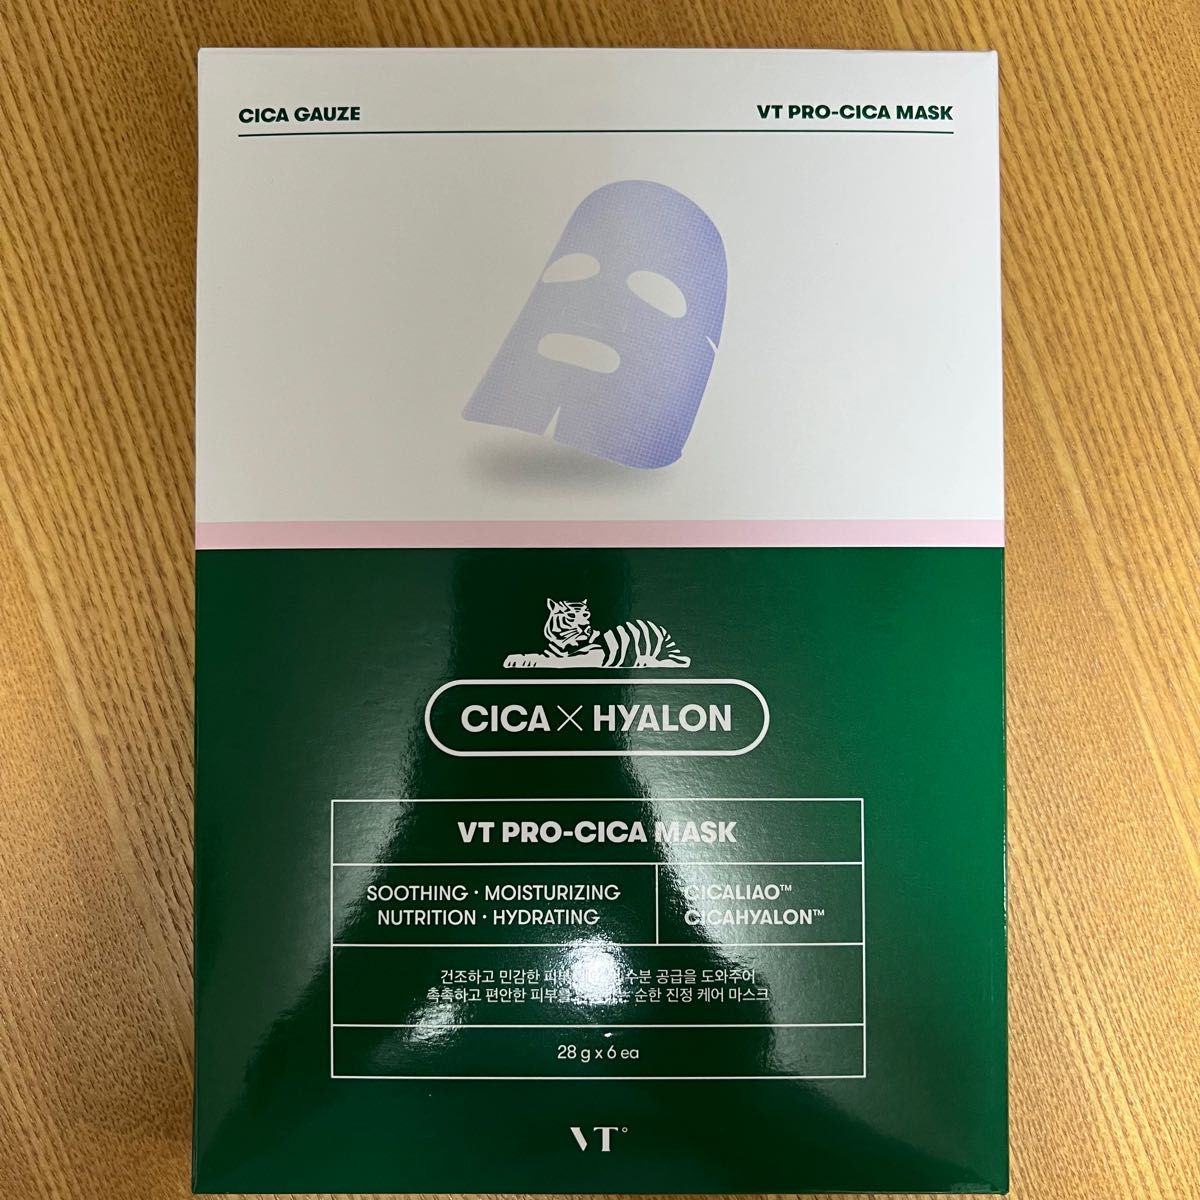 VT CICA AMPOULE MASK PRO-CICA MASK シカ アンプルマスク シカマスク セット